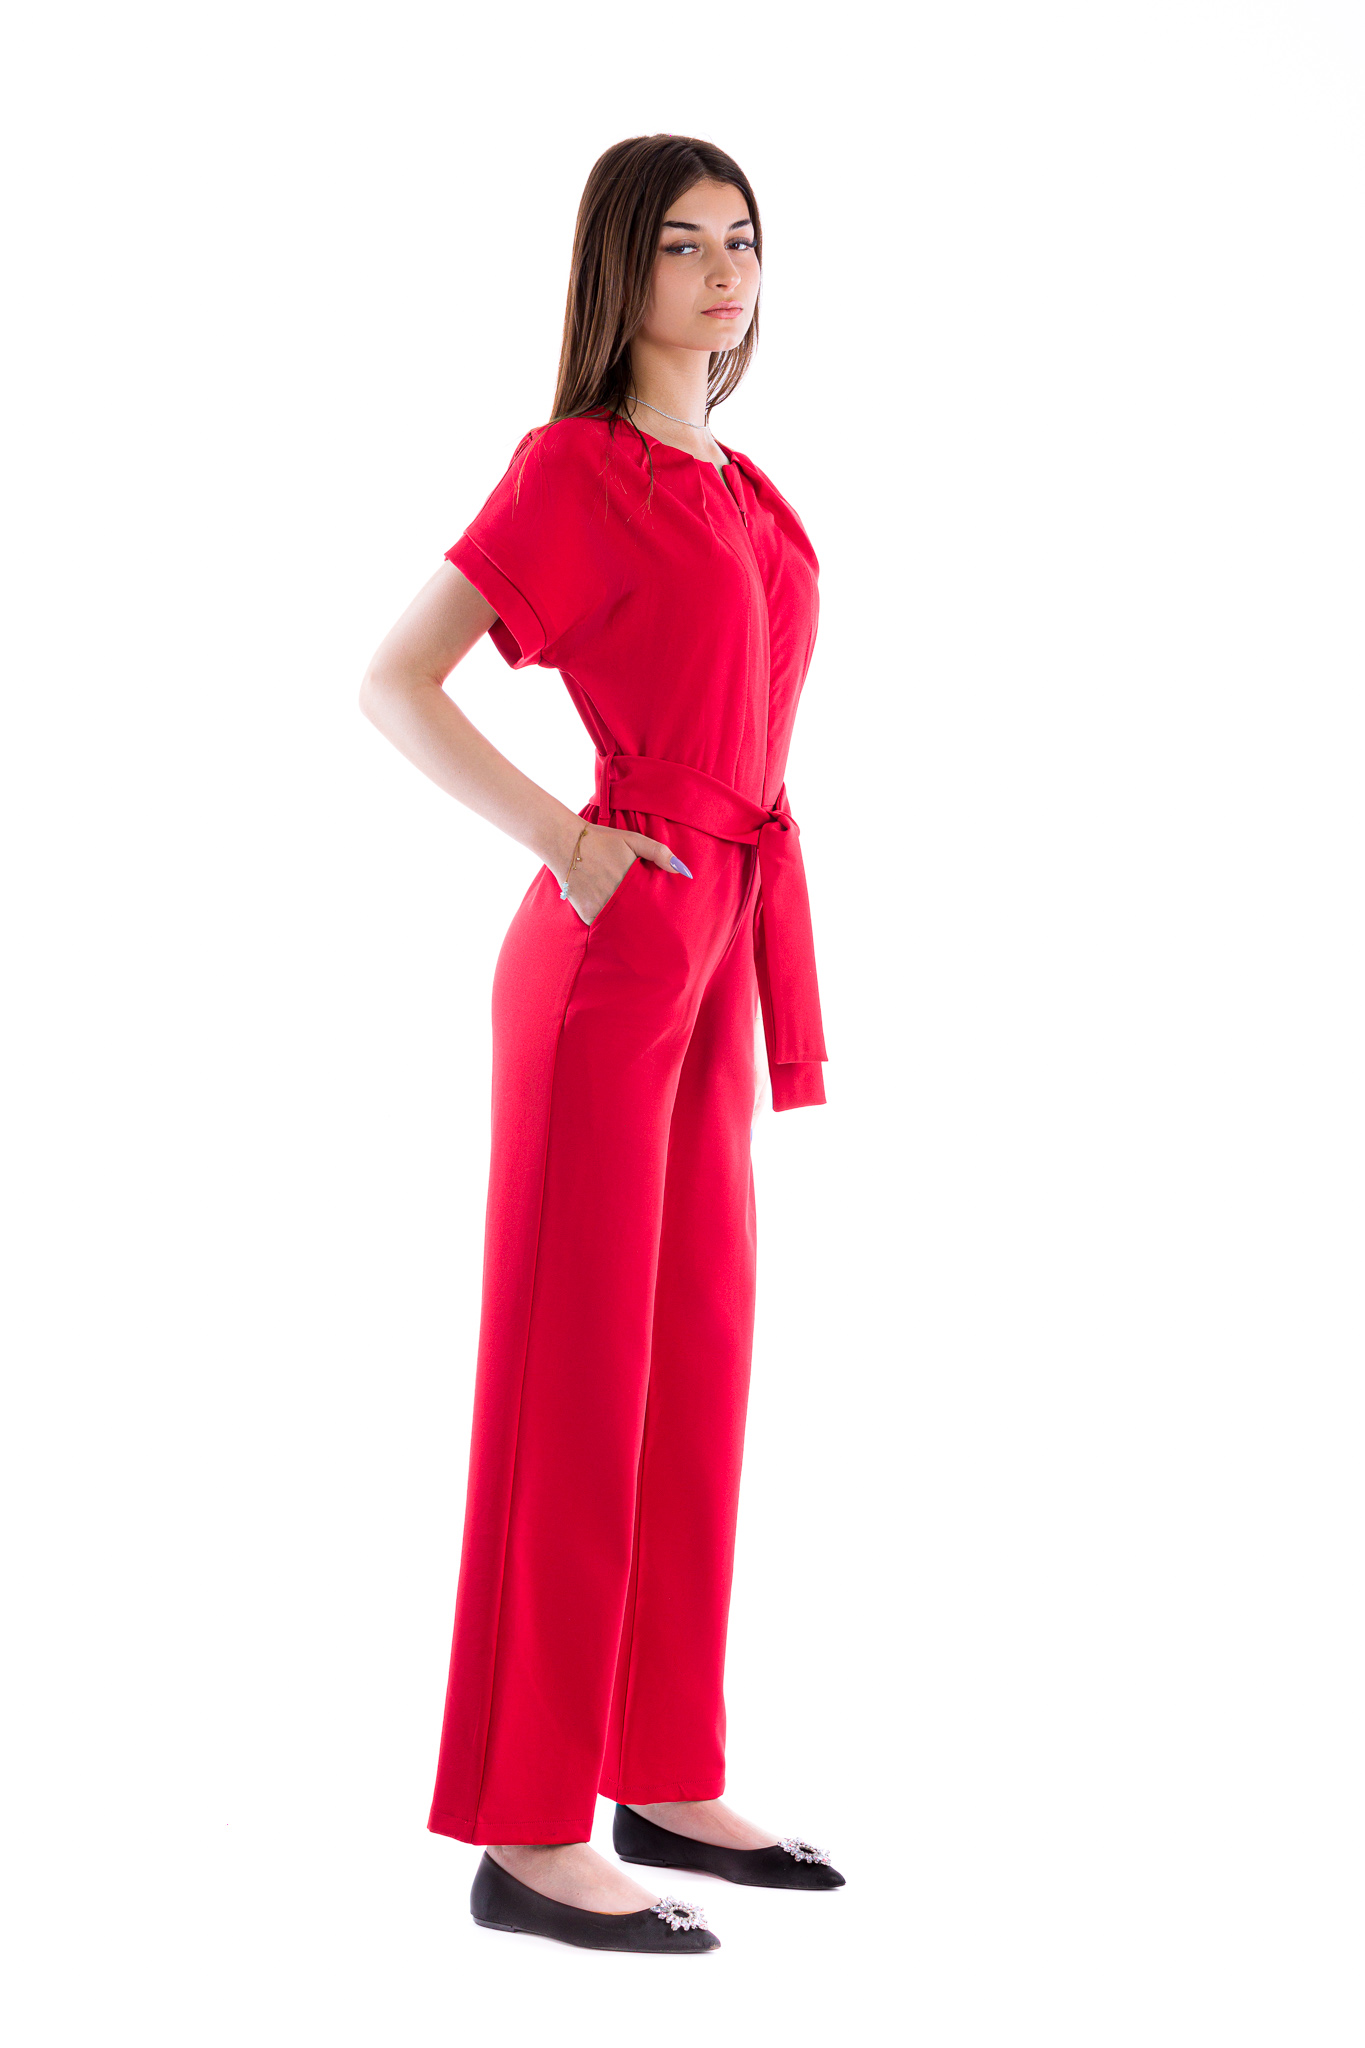 This red LOVE jumpsuit for women is made from high-quality viscose fabric that exudes luxury while ensuring maximum comfort